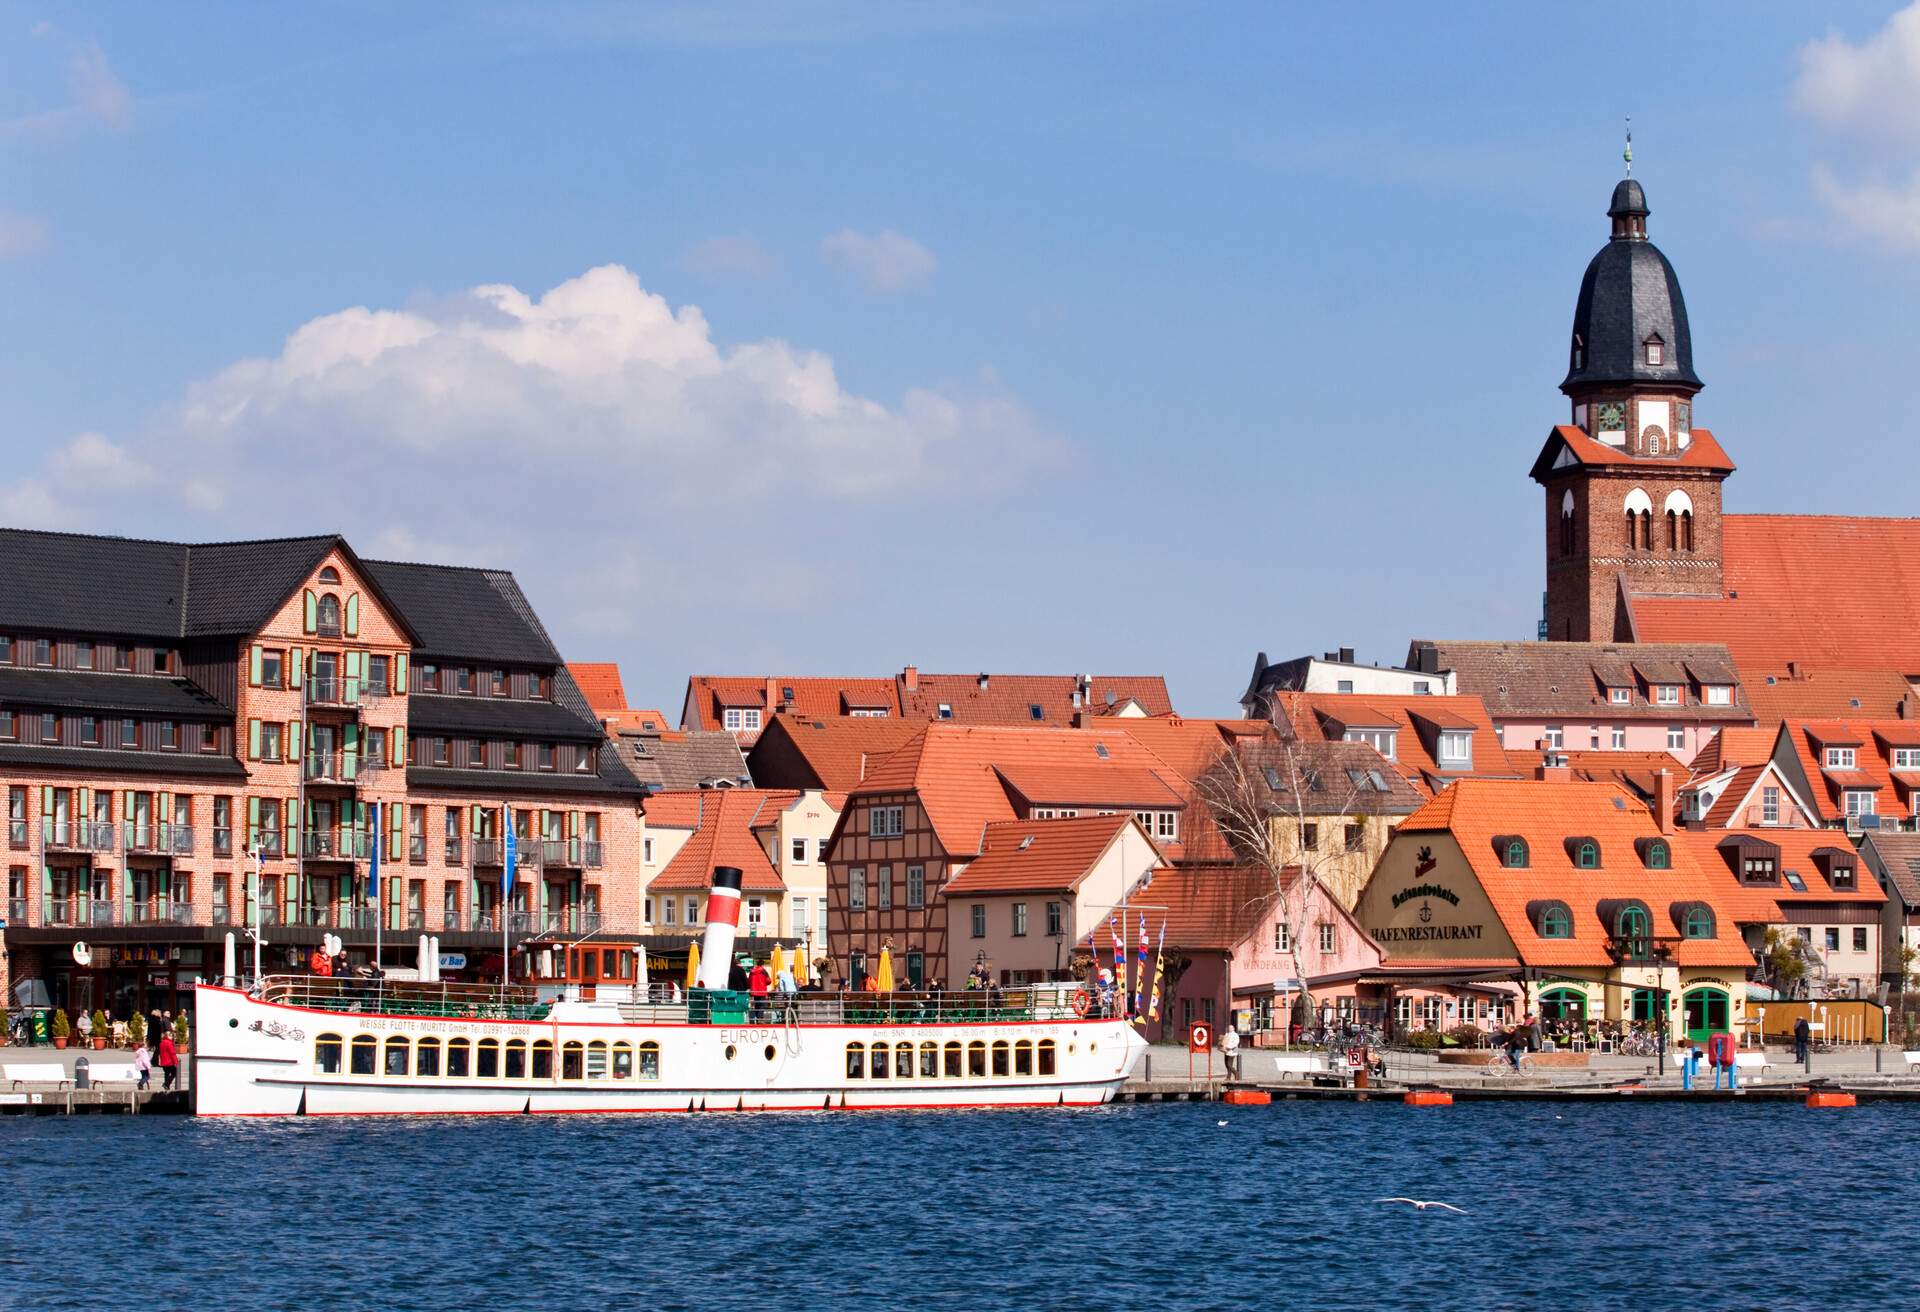 A long boat moored in a port with a charming historic centre that features a variety of traditional architecture, including half-timbered houses and red brick buildings.